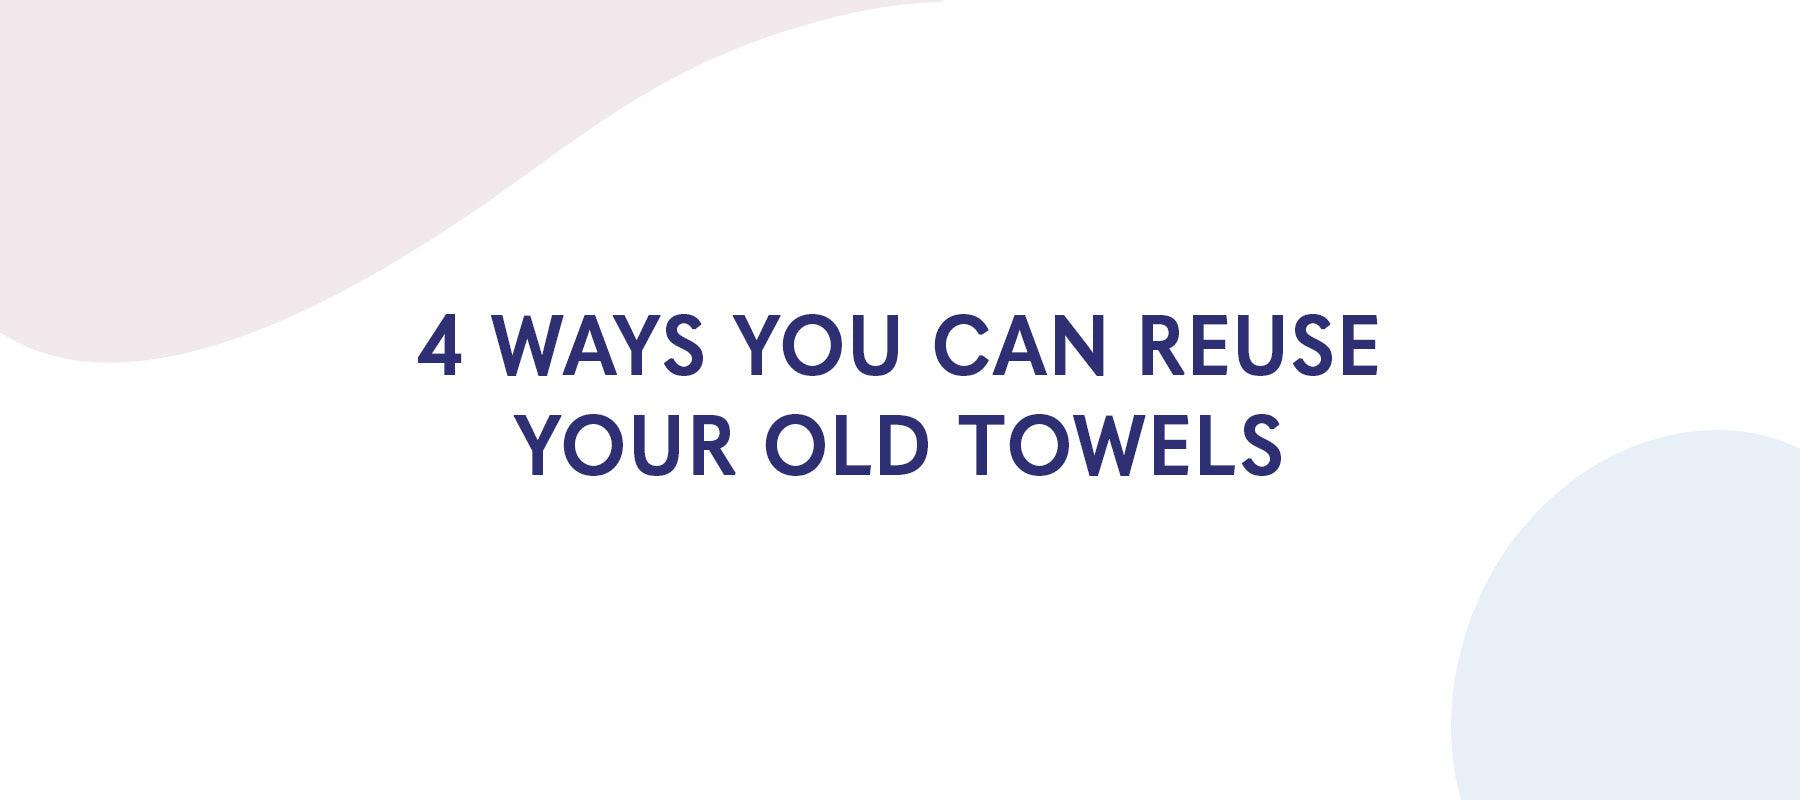 4 Ways You Can Reuse Your Old Towels - American Soft Linen